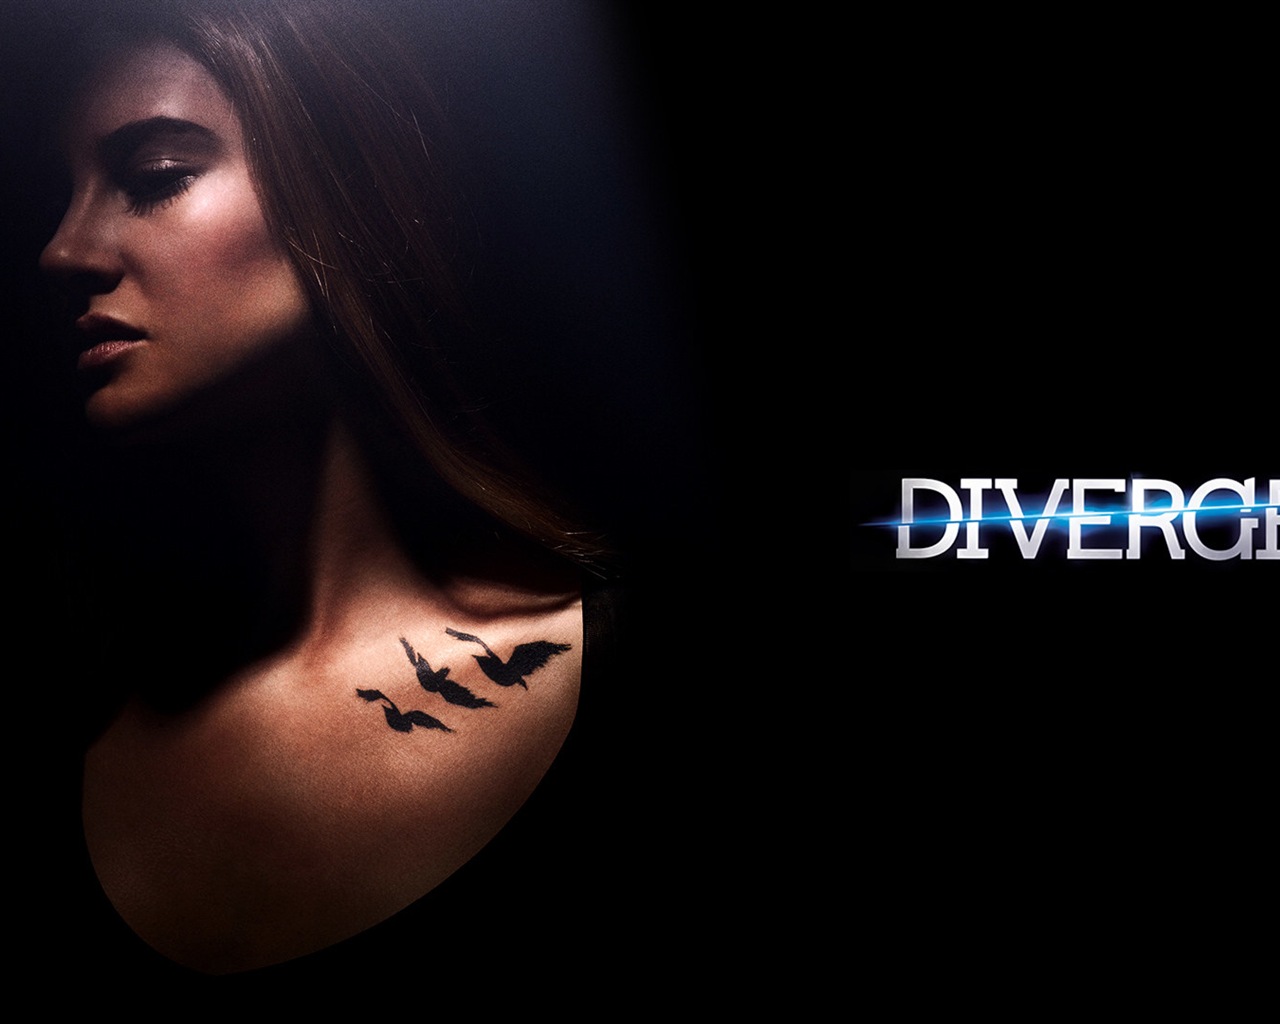 Divergent movie HD wallpapers #7 - 1280x1024